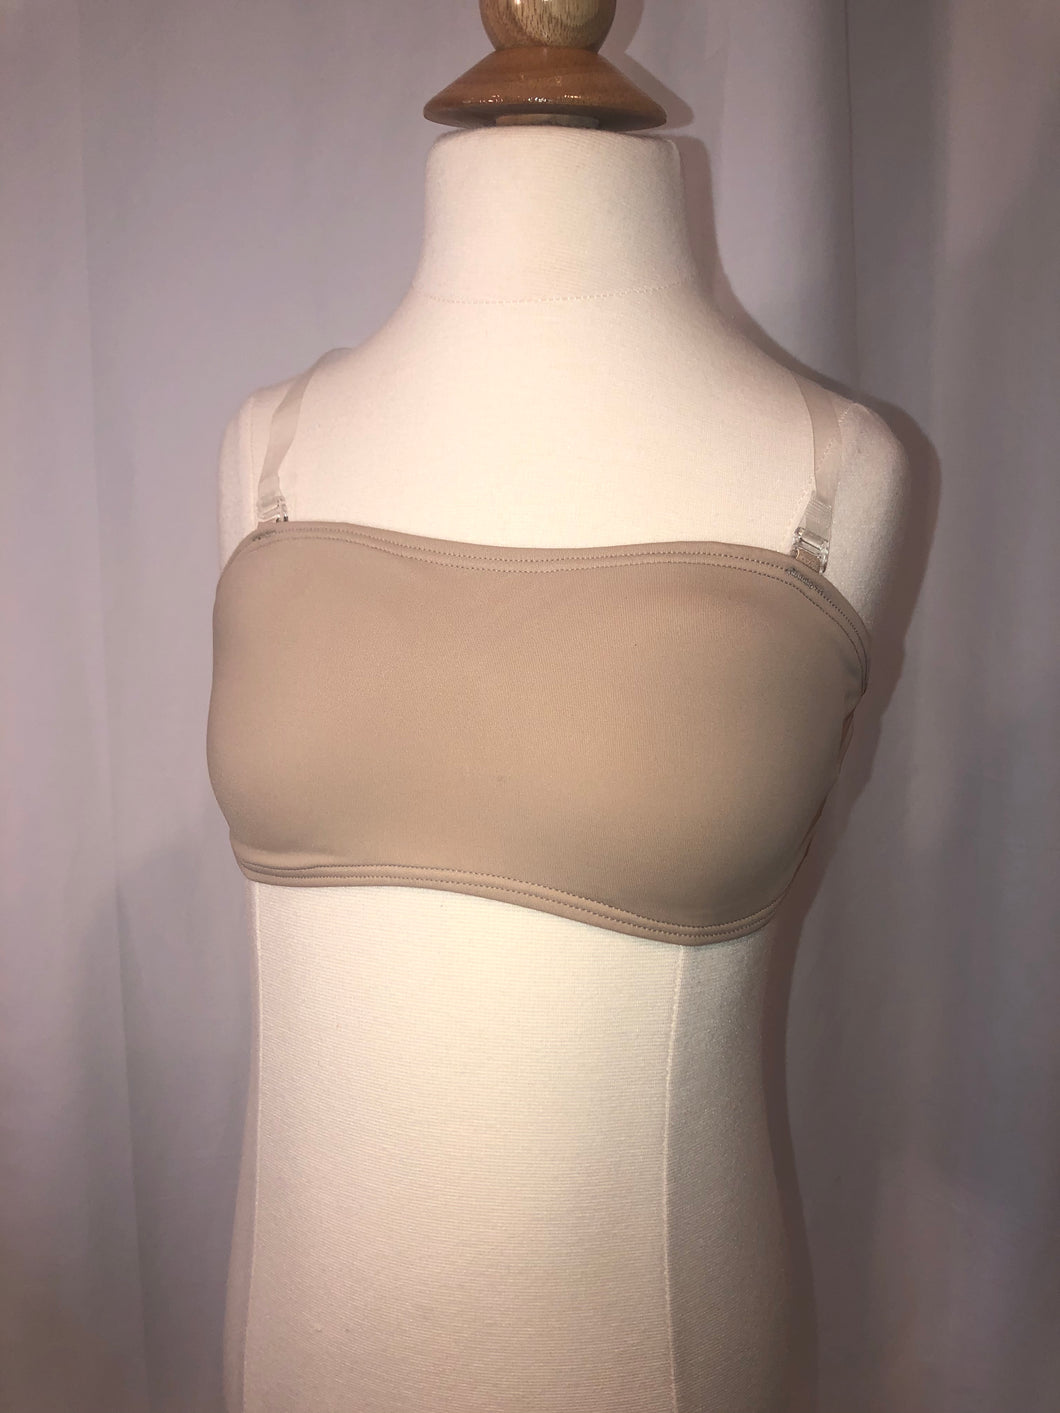 Body Wrappers Total Stretch Nude Padded Bra